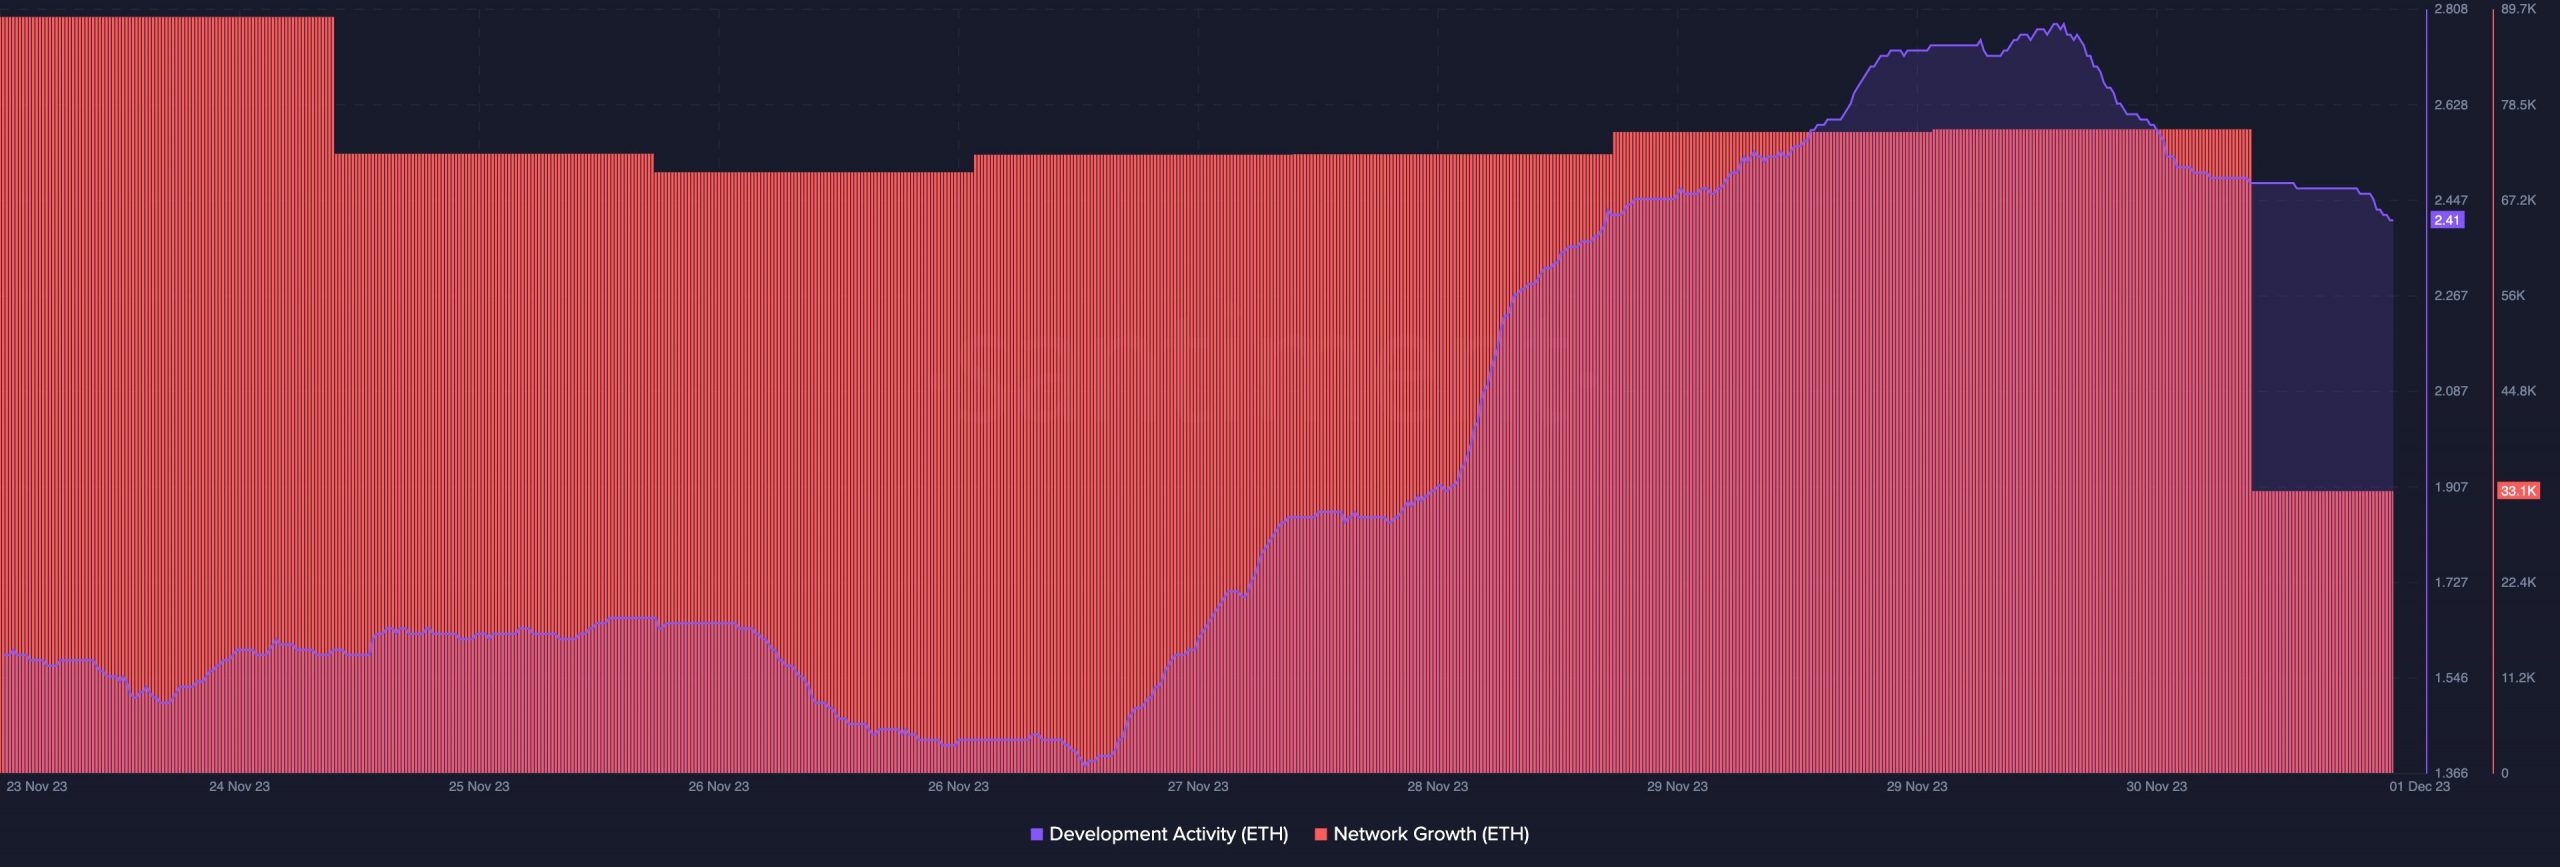 Ethereum development activity and network growth